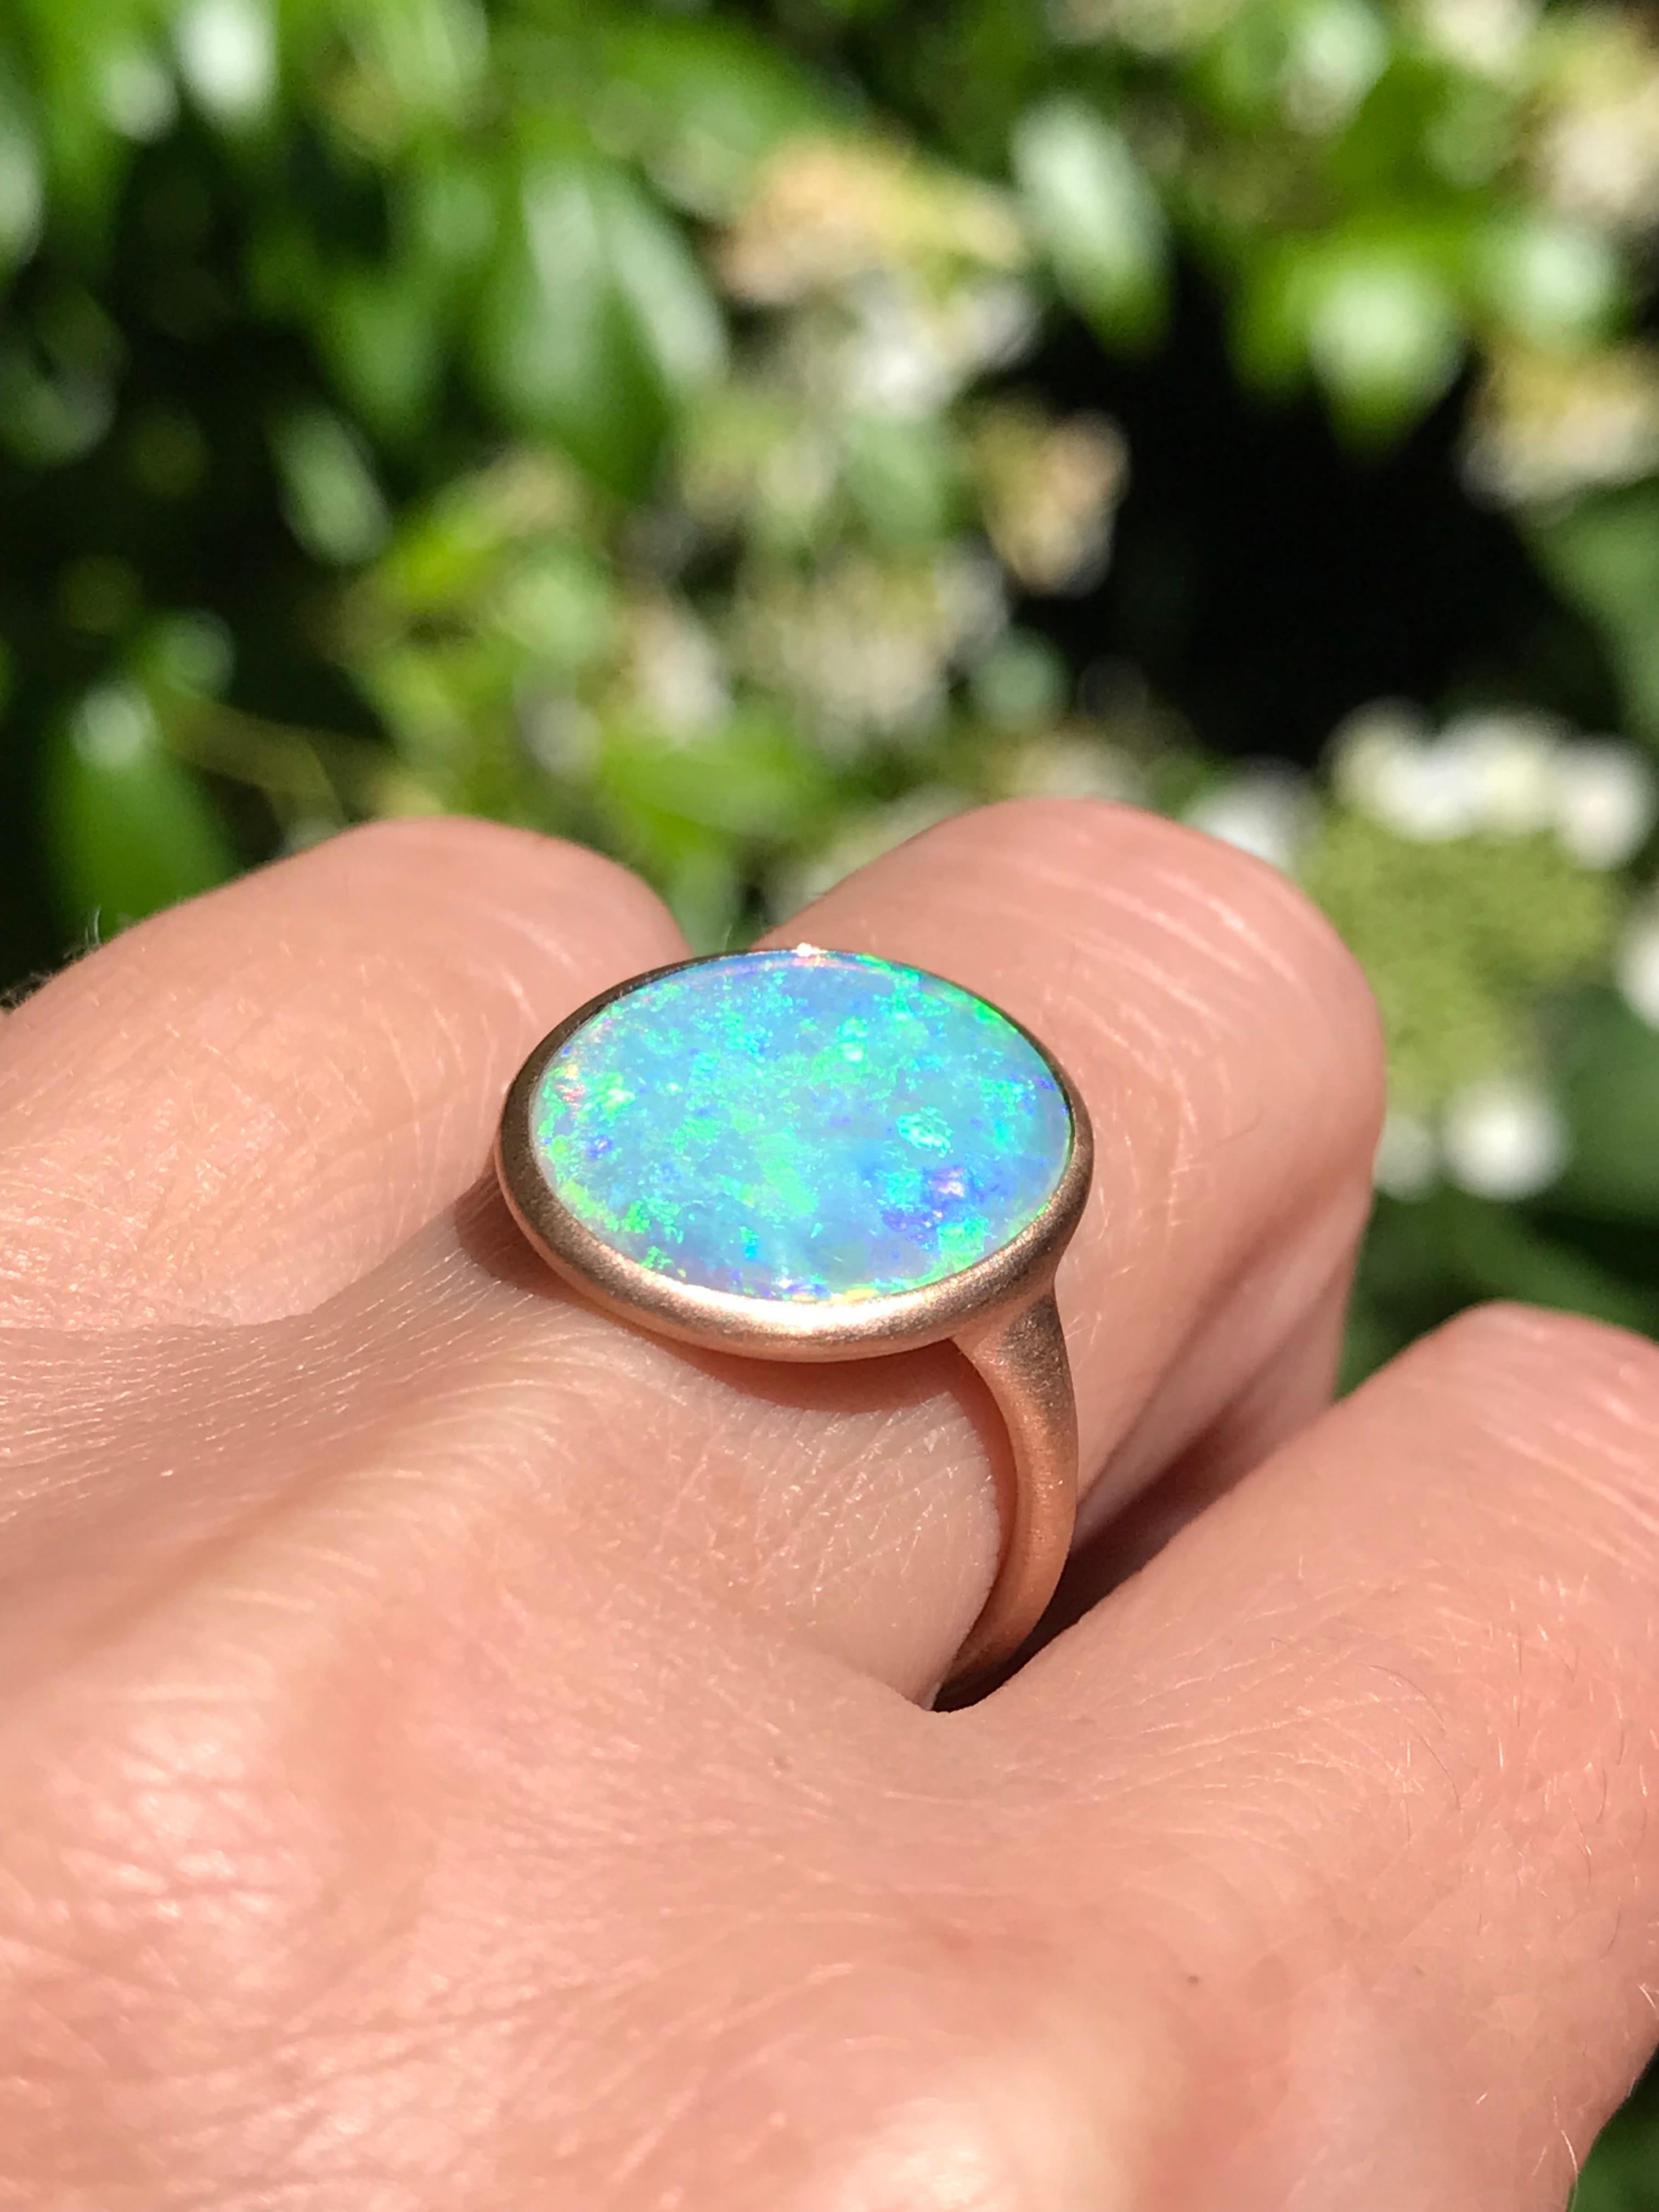 Dalben design One of a kind 18 kt rose  gold ring with an oval cabochon solid Australian Crystal Opal weight 18,34 carats from Coober Pedy  .
The white labradorite has  wonderful blue reflex 
Ring size  US 7 1/4   -  EU 55 re-sizable .  
Bezels